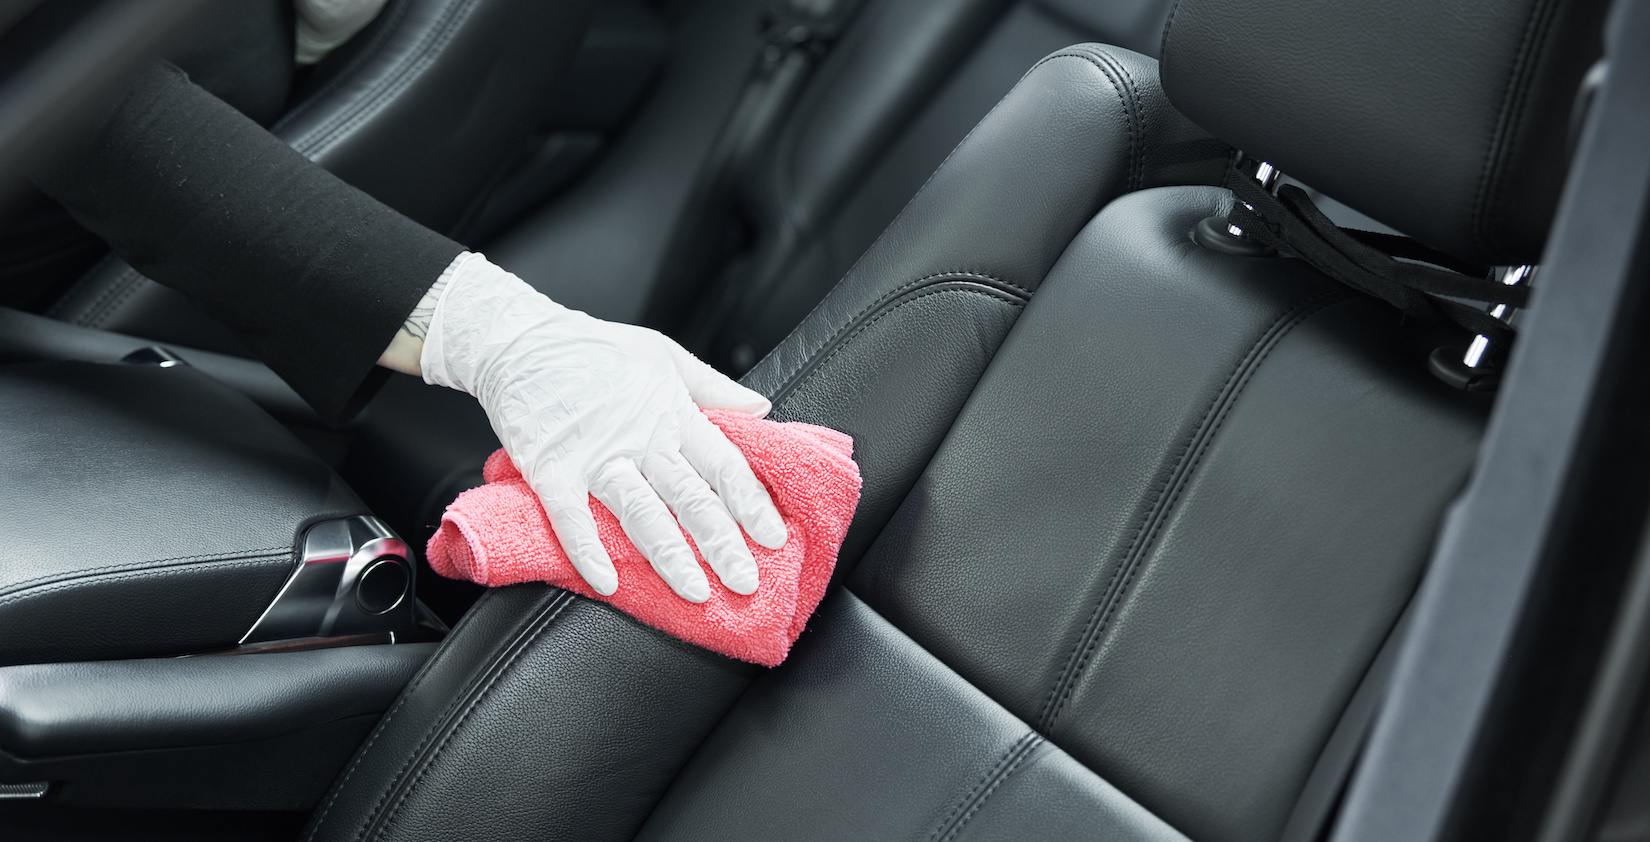 Hand with a plastic glove washing a leather car seat.